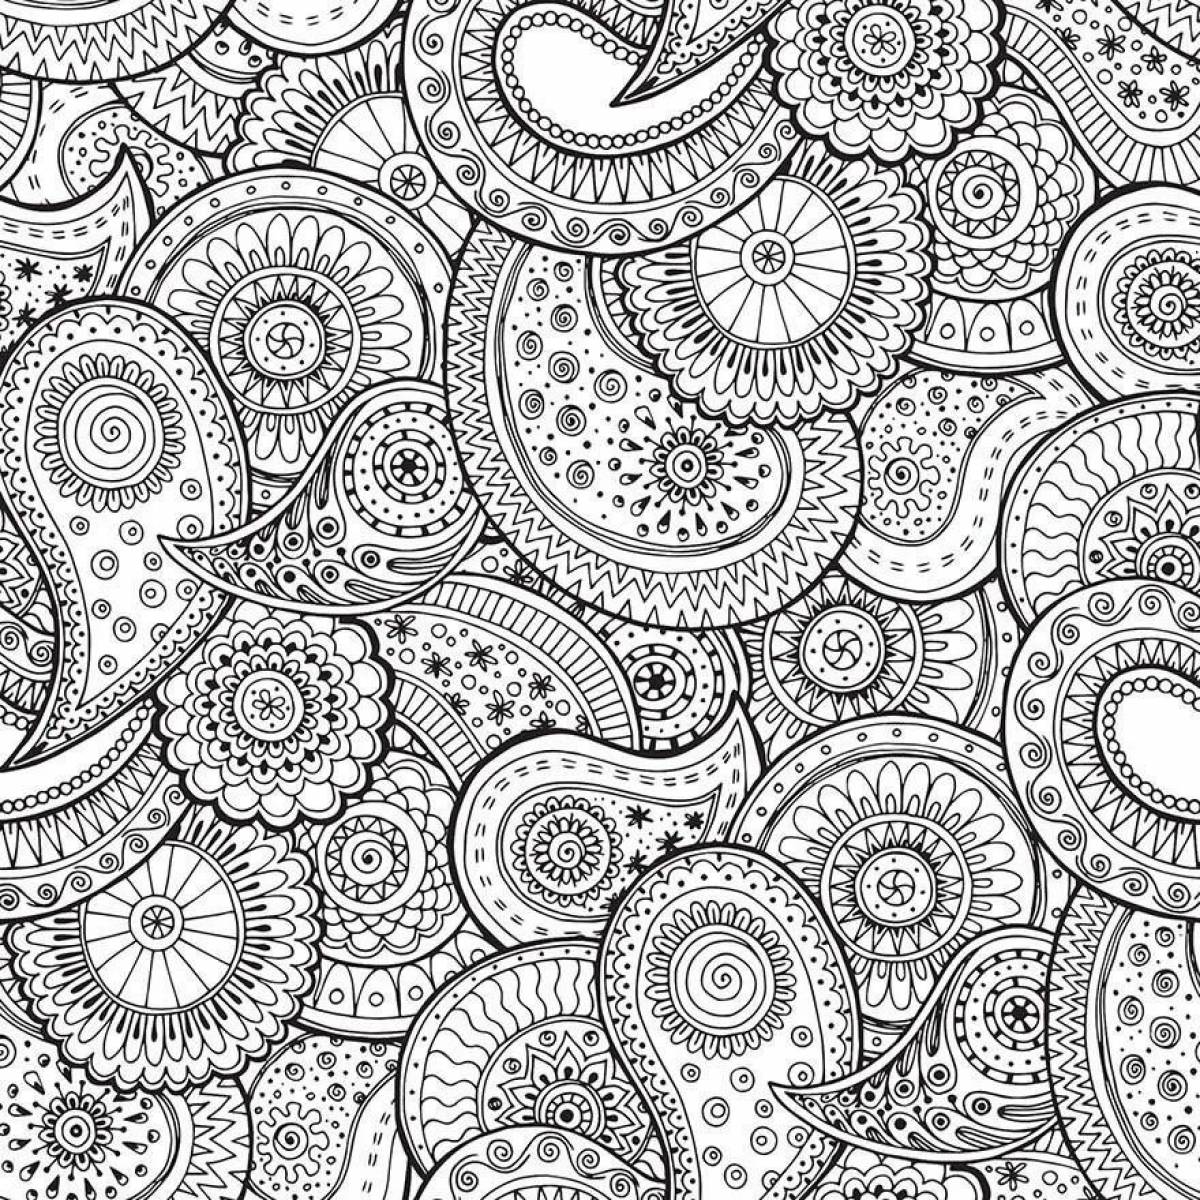 Colorful patterned coloring book